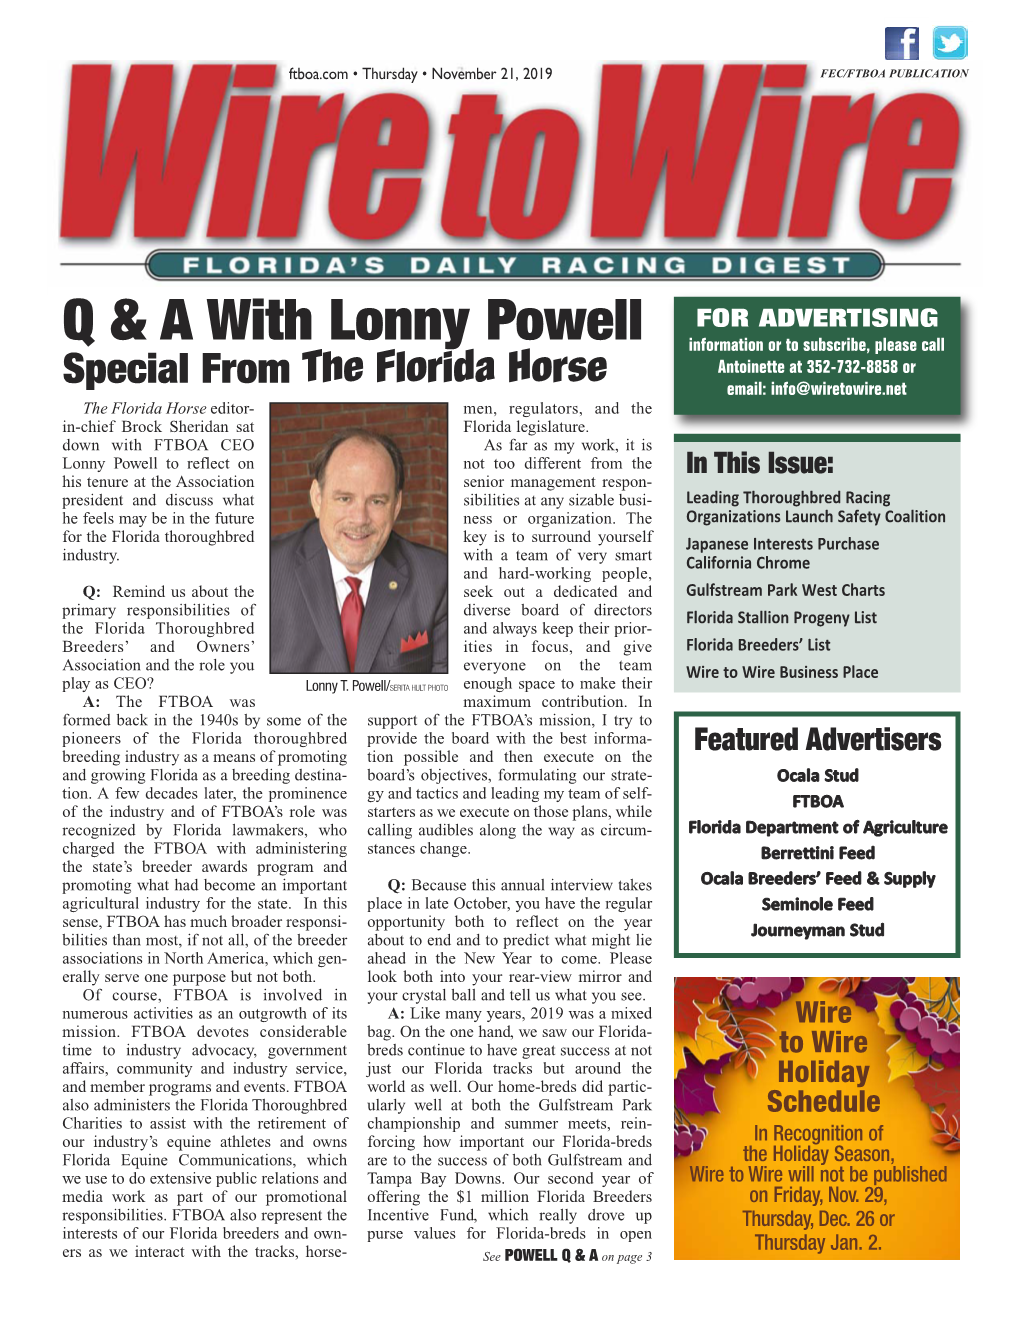 Q & a with Lonny Powell